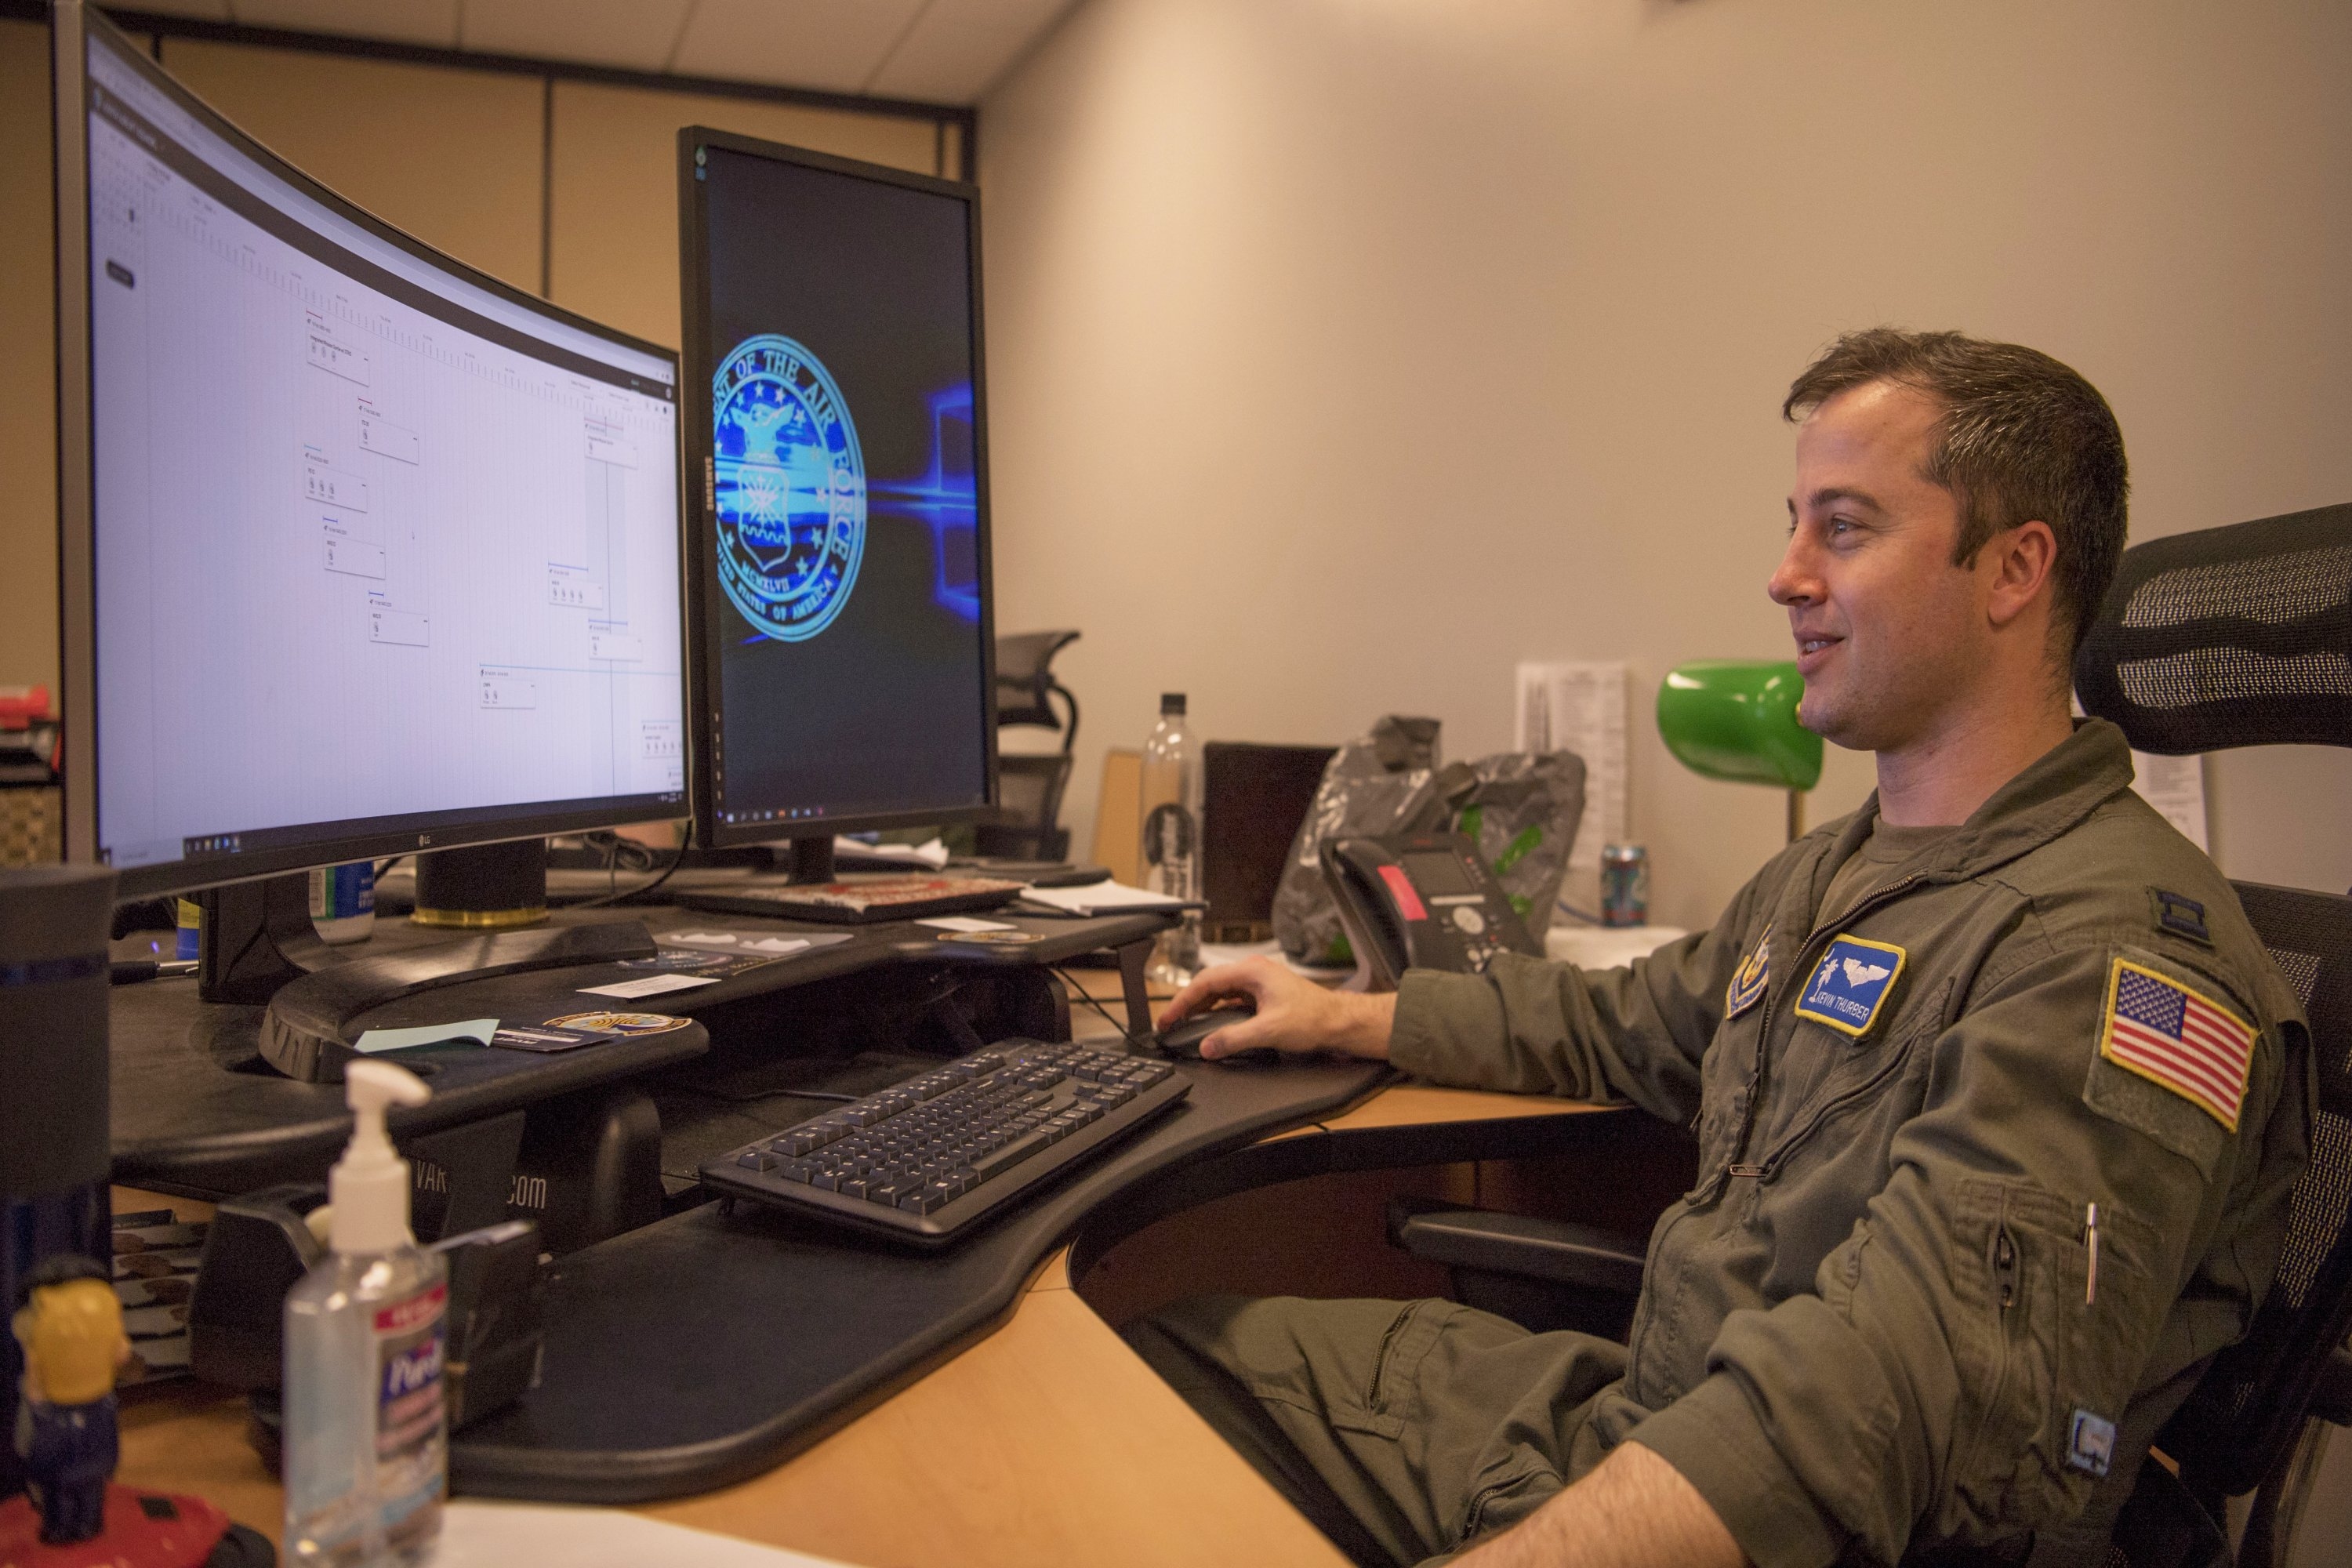 US Air Force pilots get an artificial intelligence assist with scheduling  aircrews | MIT News | Massachusetts Institute of Technology